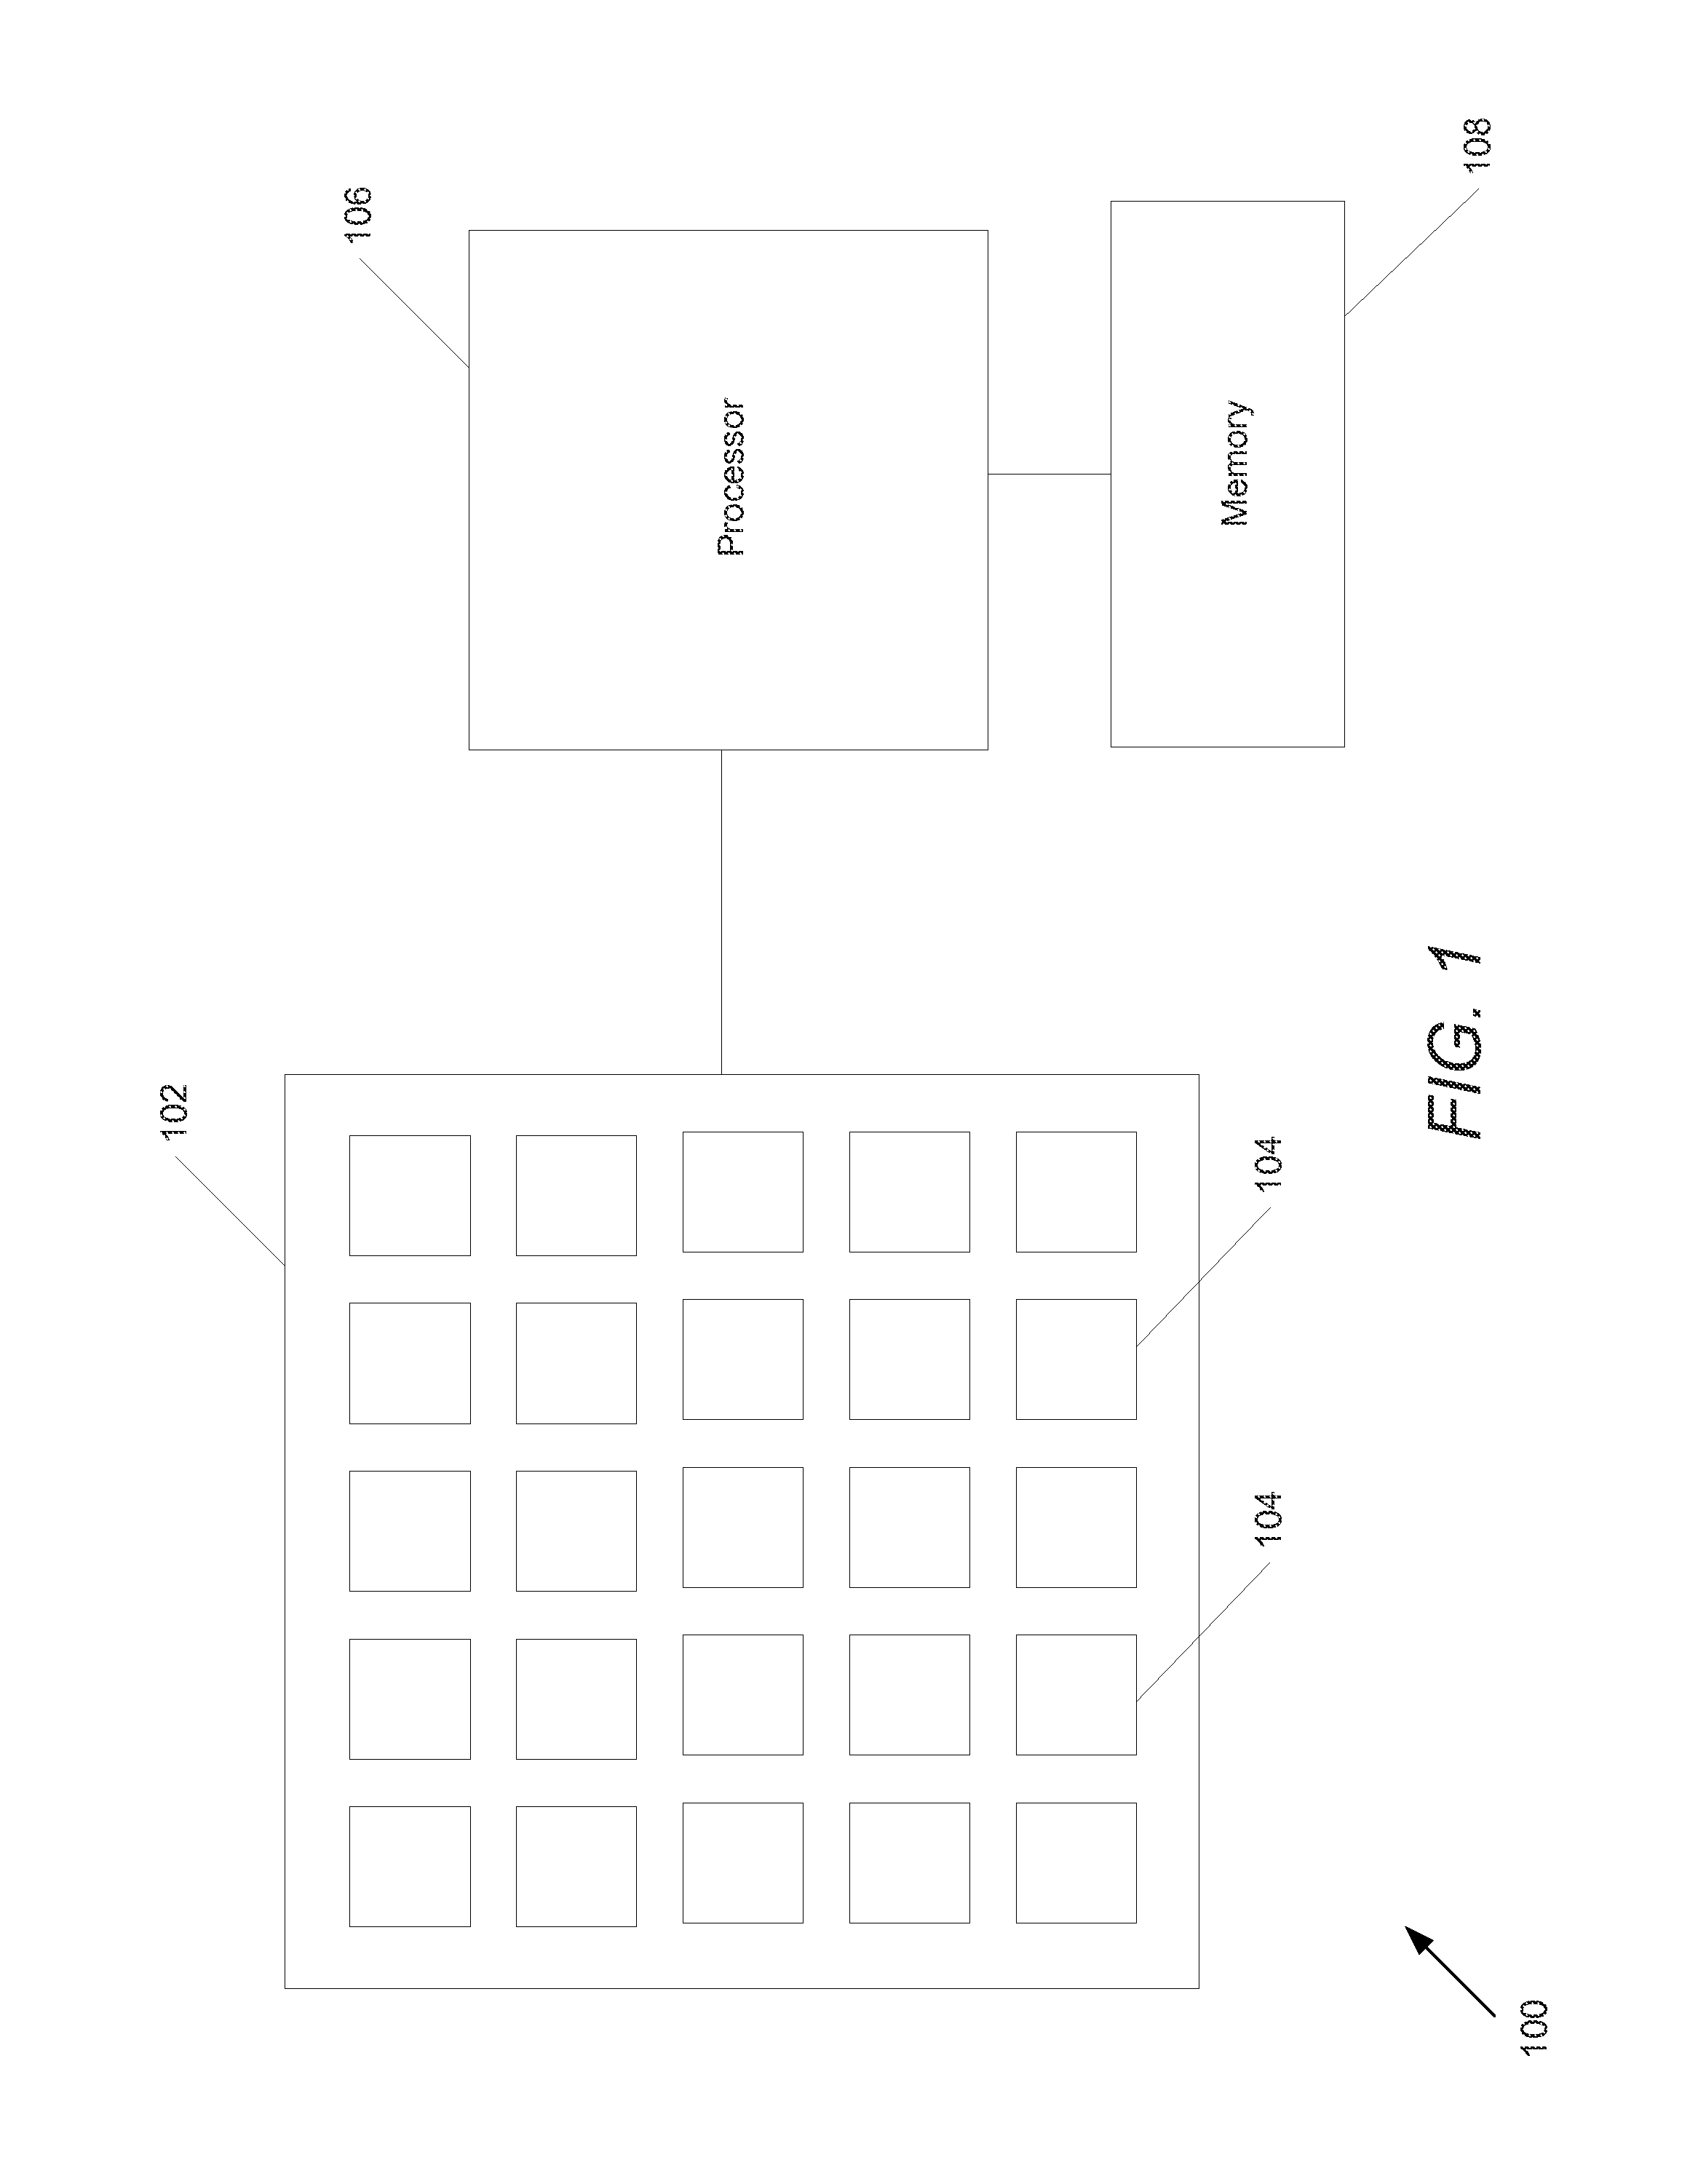 Systems and Methods for Measuring Scene Information While Capturing Images Using Array Cameras